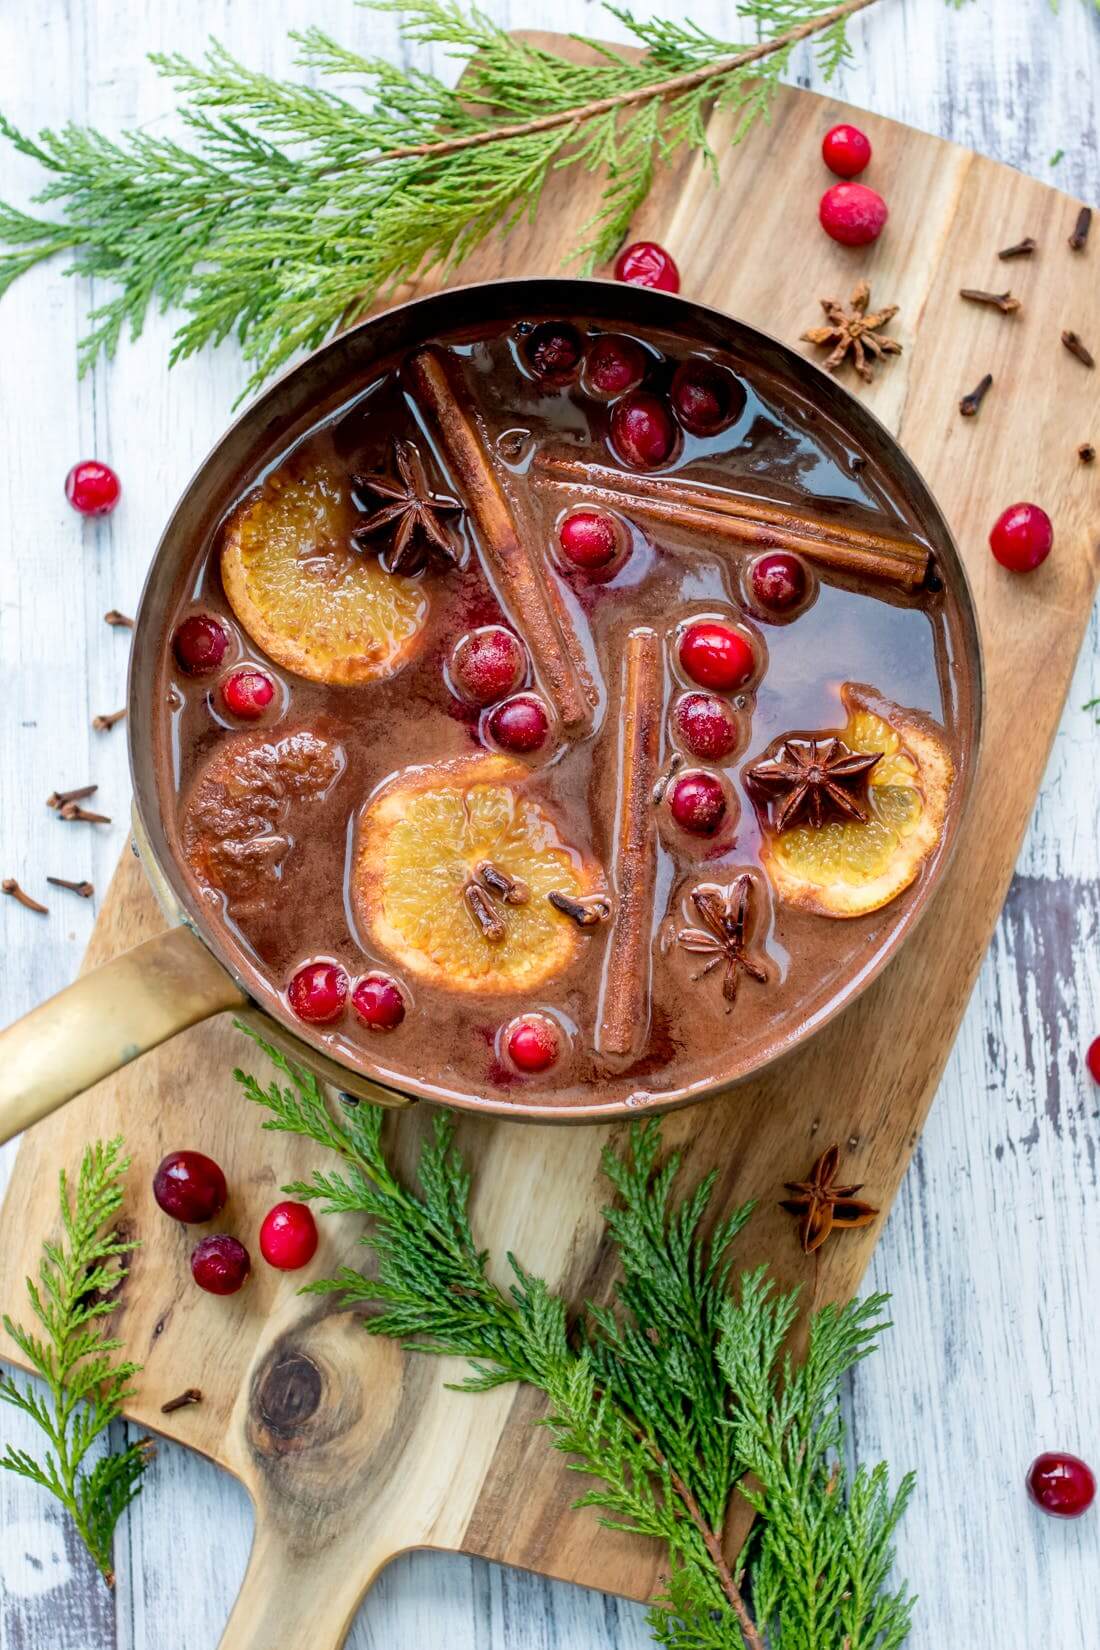 Boozy Mulled Wine Hot Chocolate Recipe || 5 variations for the good ol' winter favorite - the mulled wine! Click through for my picks of the comforting winter drink